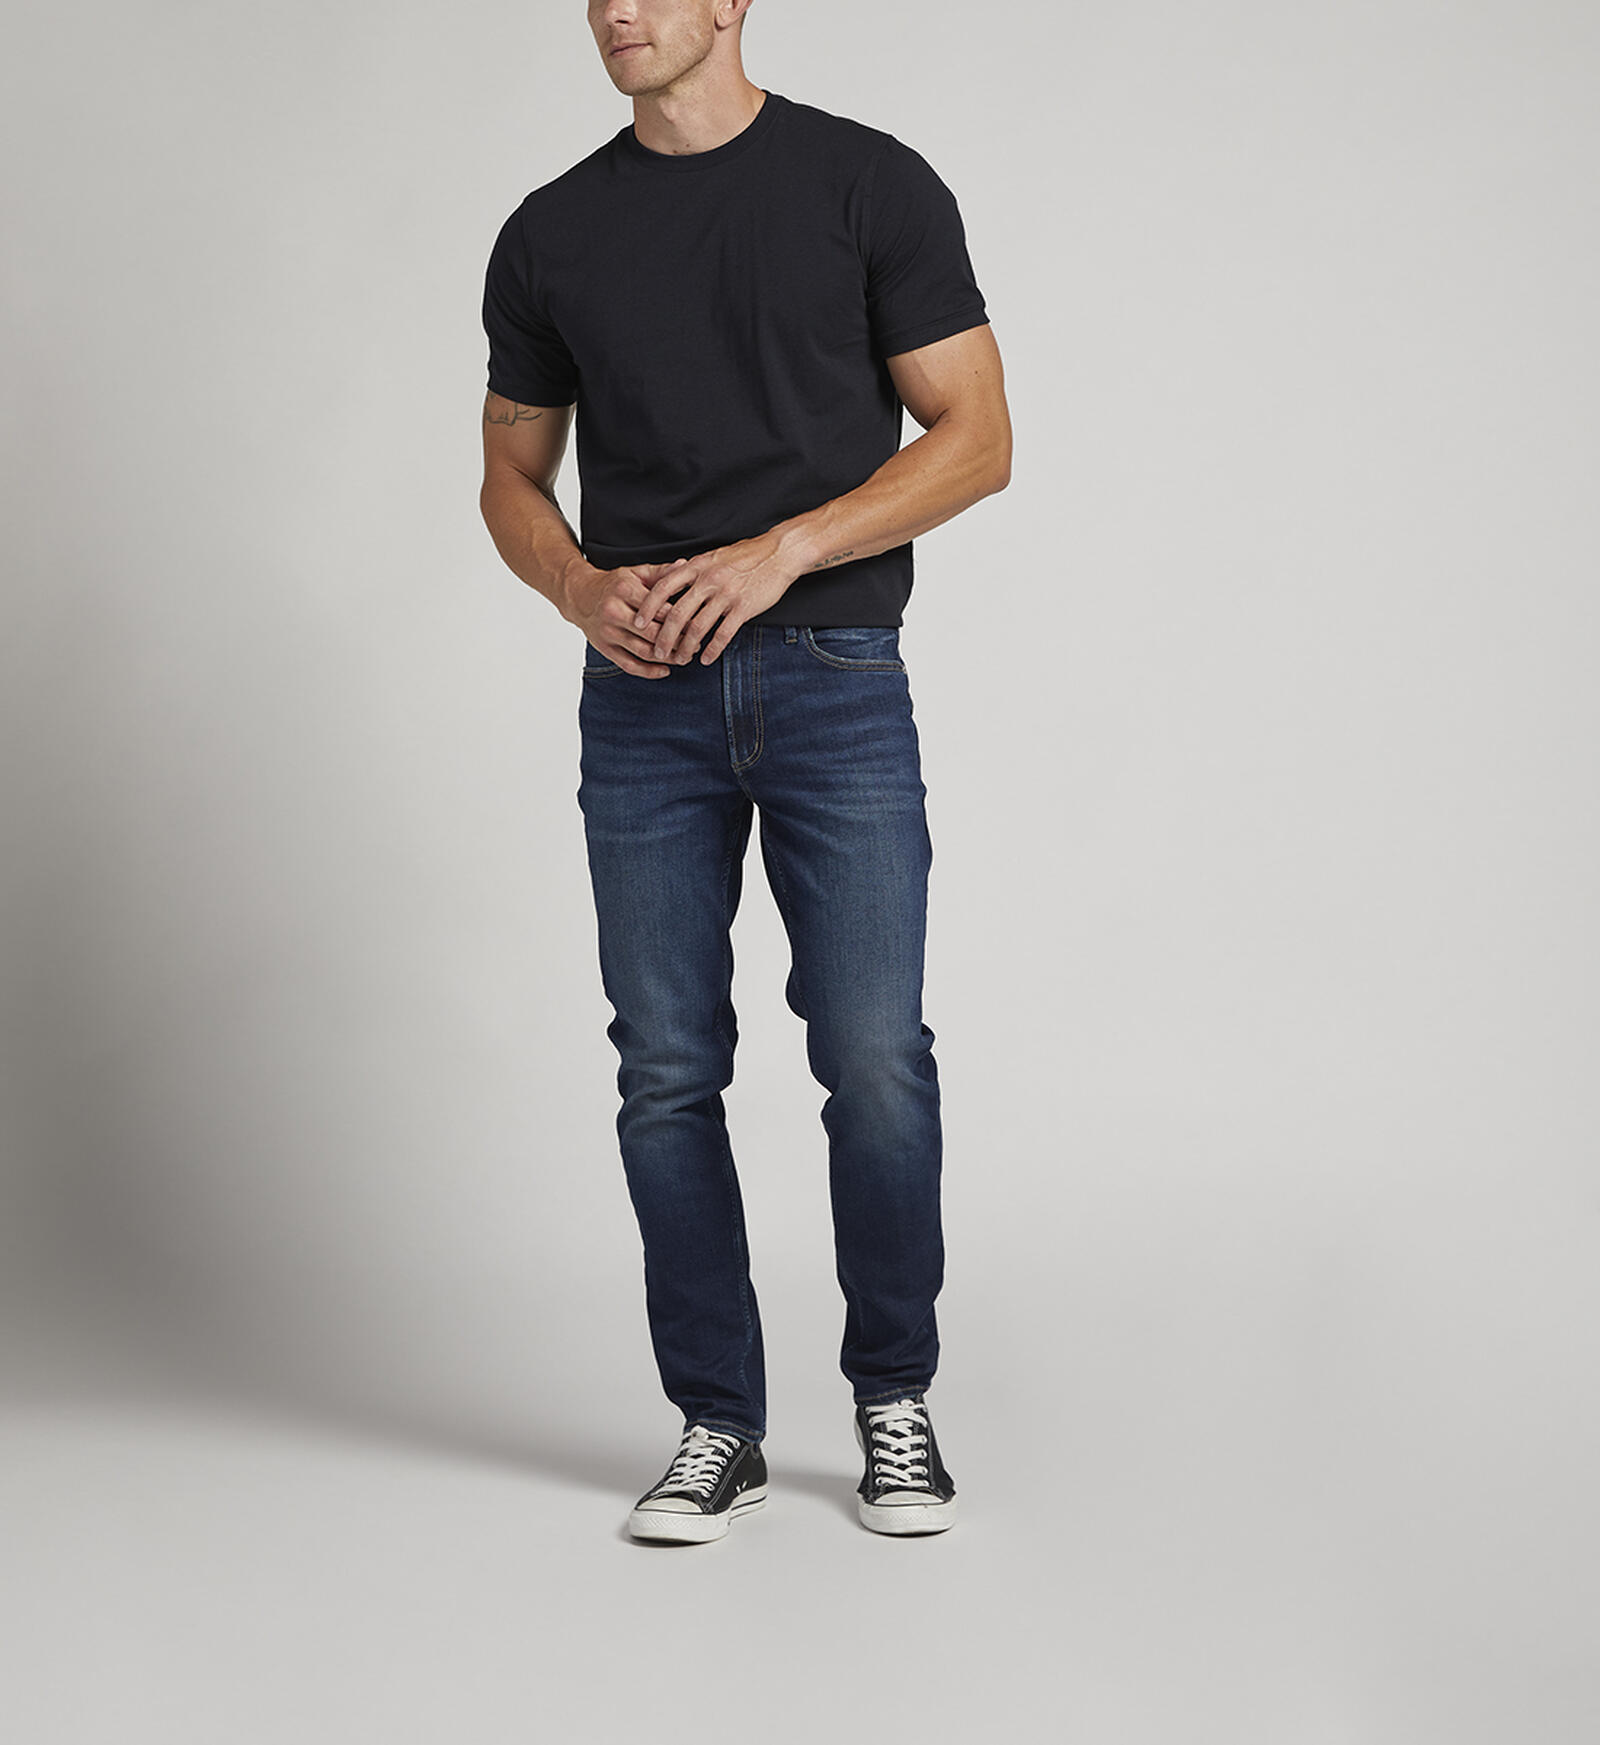 Silver Jeans Co. The Athletic Slim Fit Jeans